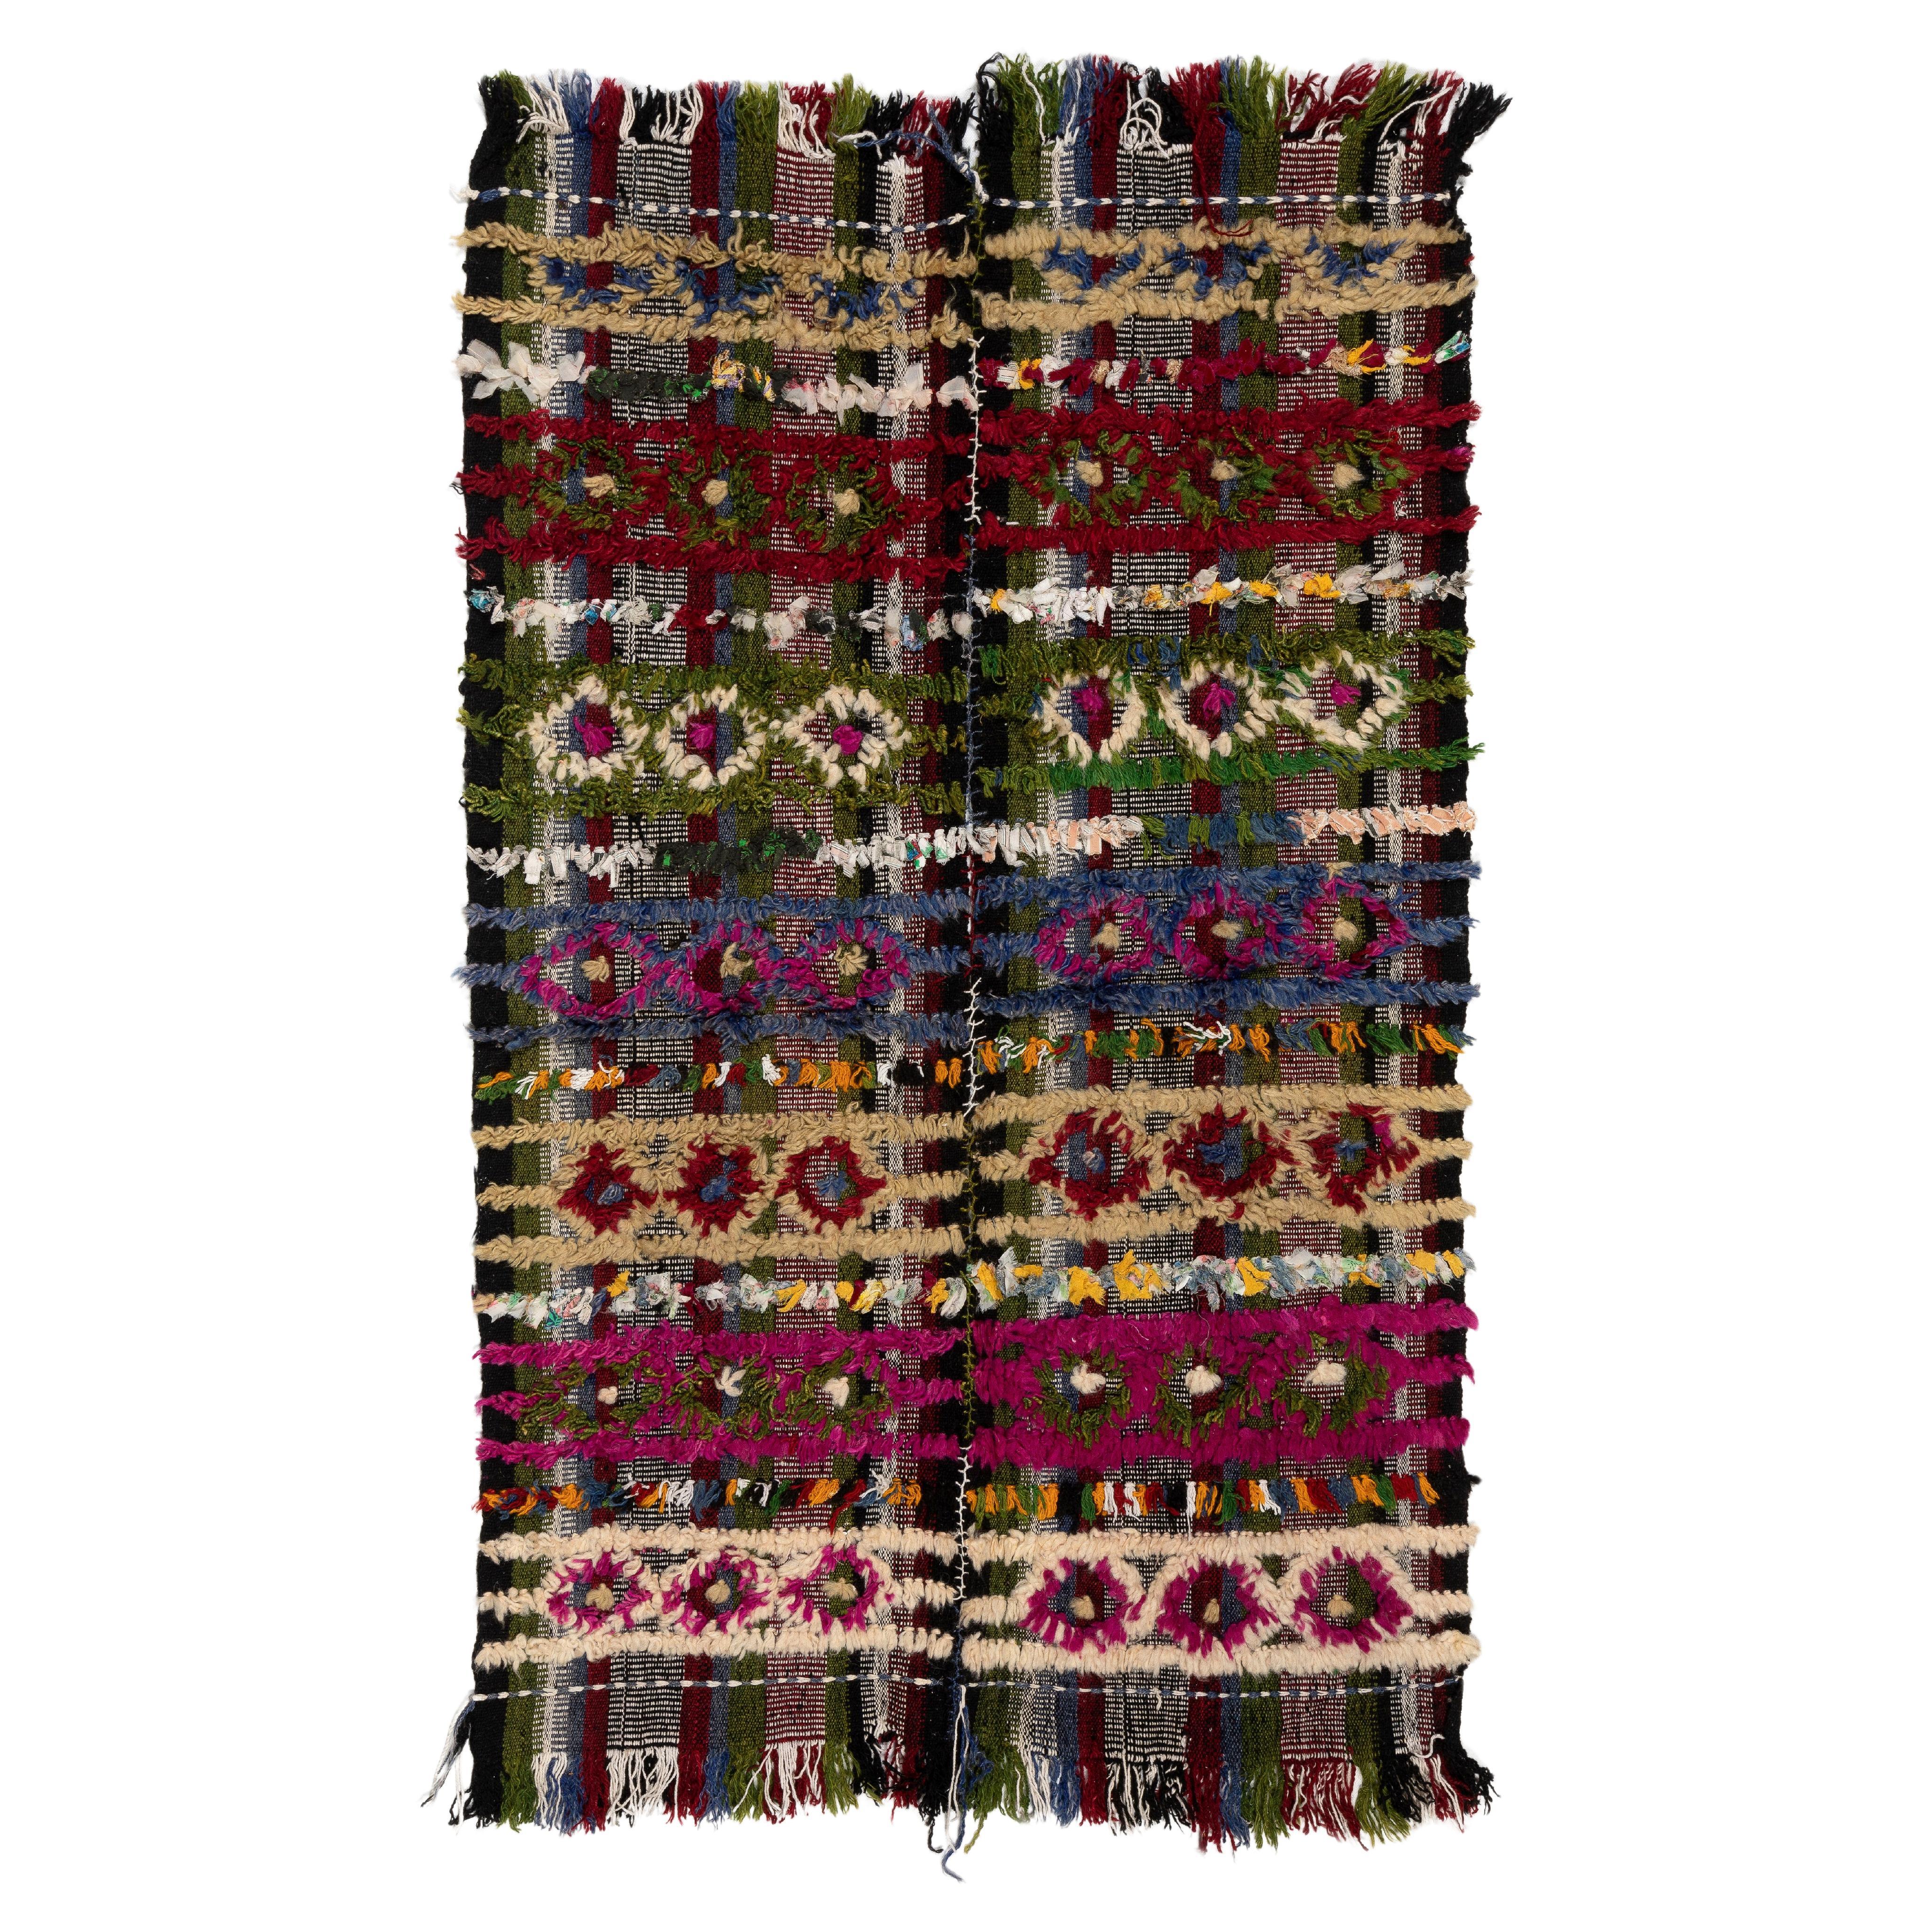 3x4.7 Ft Vintage Turkish Colorful Kilim. Bed, Floor, Sofa Cover or Wall Hanging For Sale